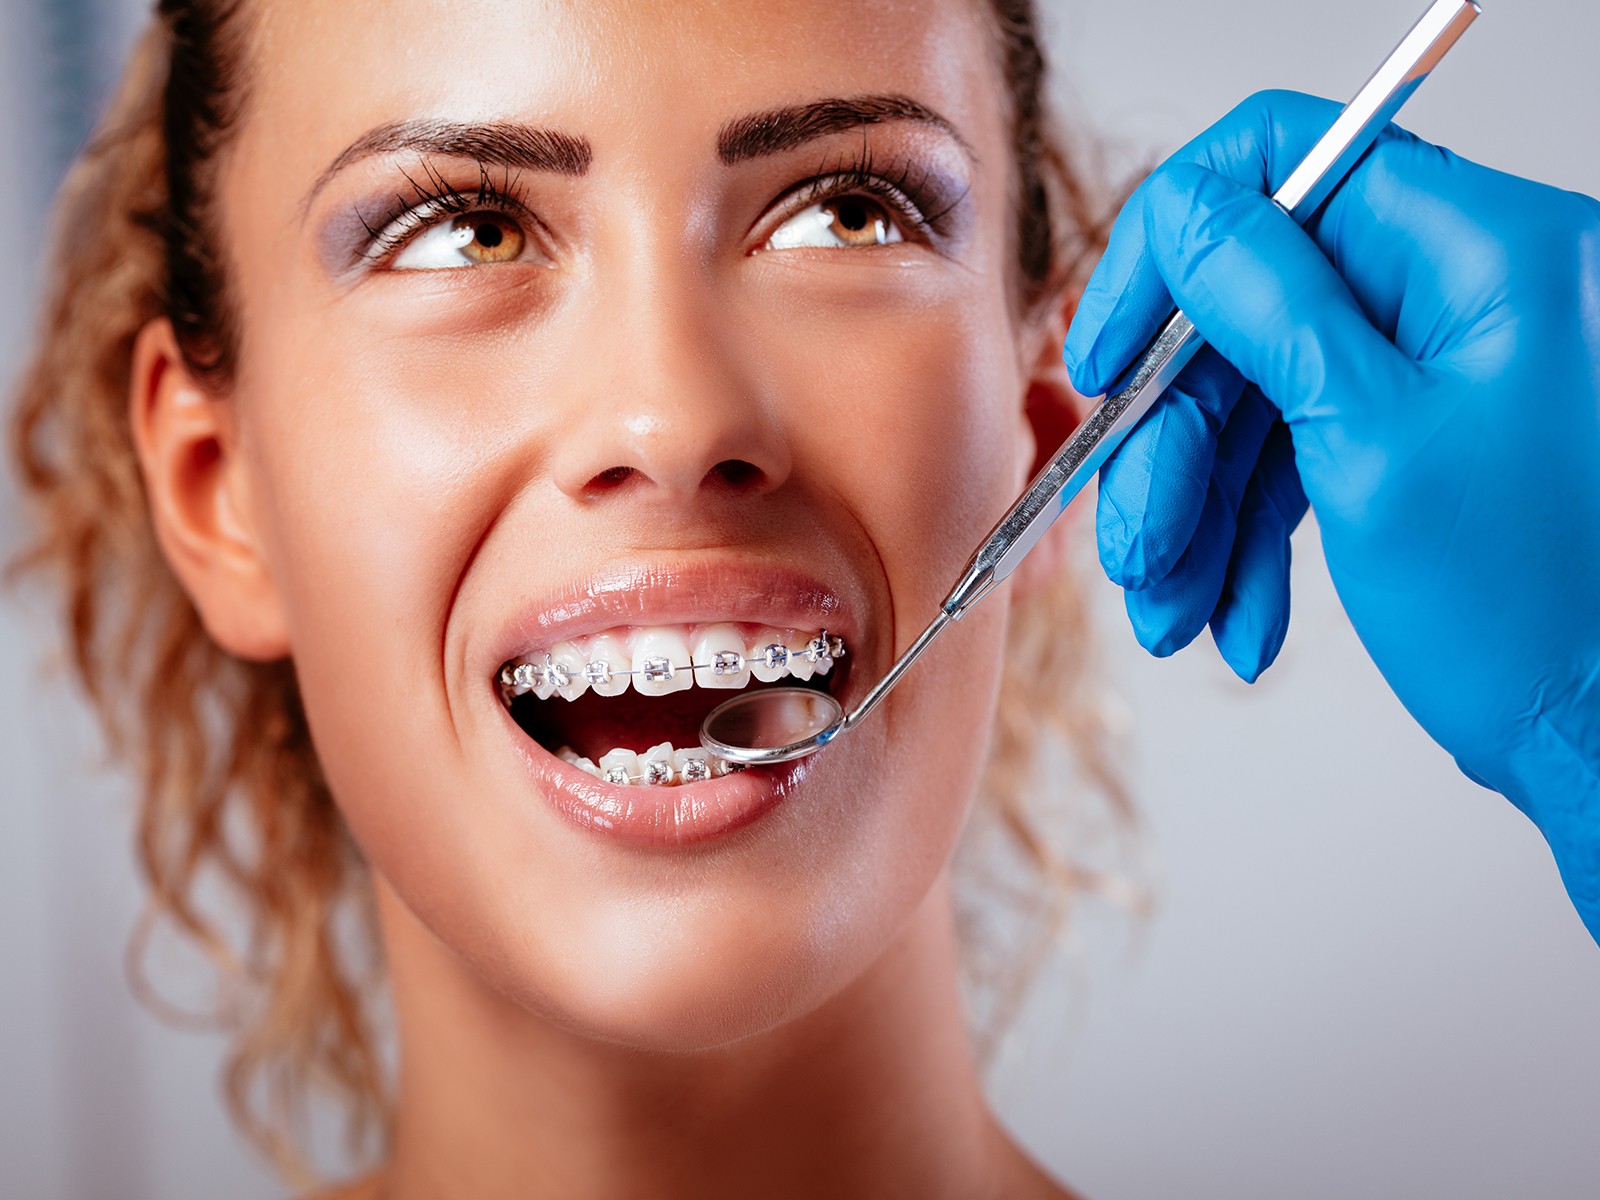 Does flossing help speed up braces?